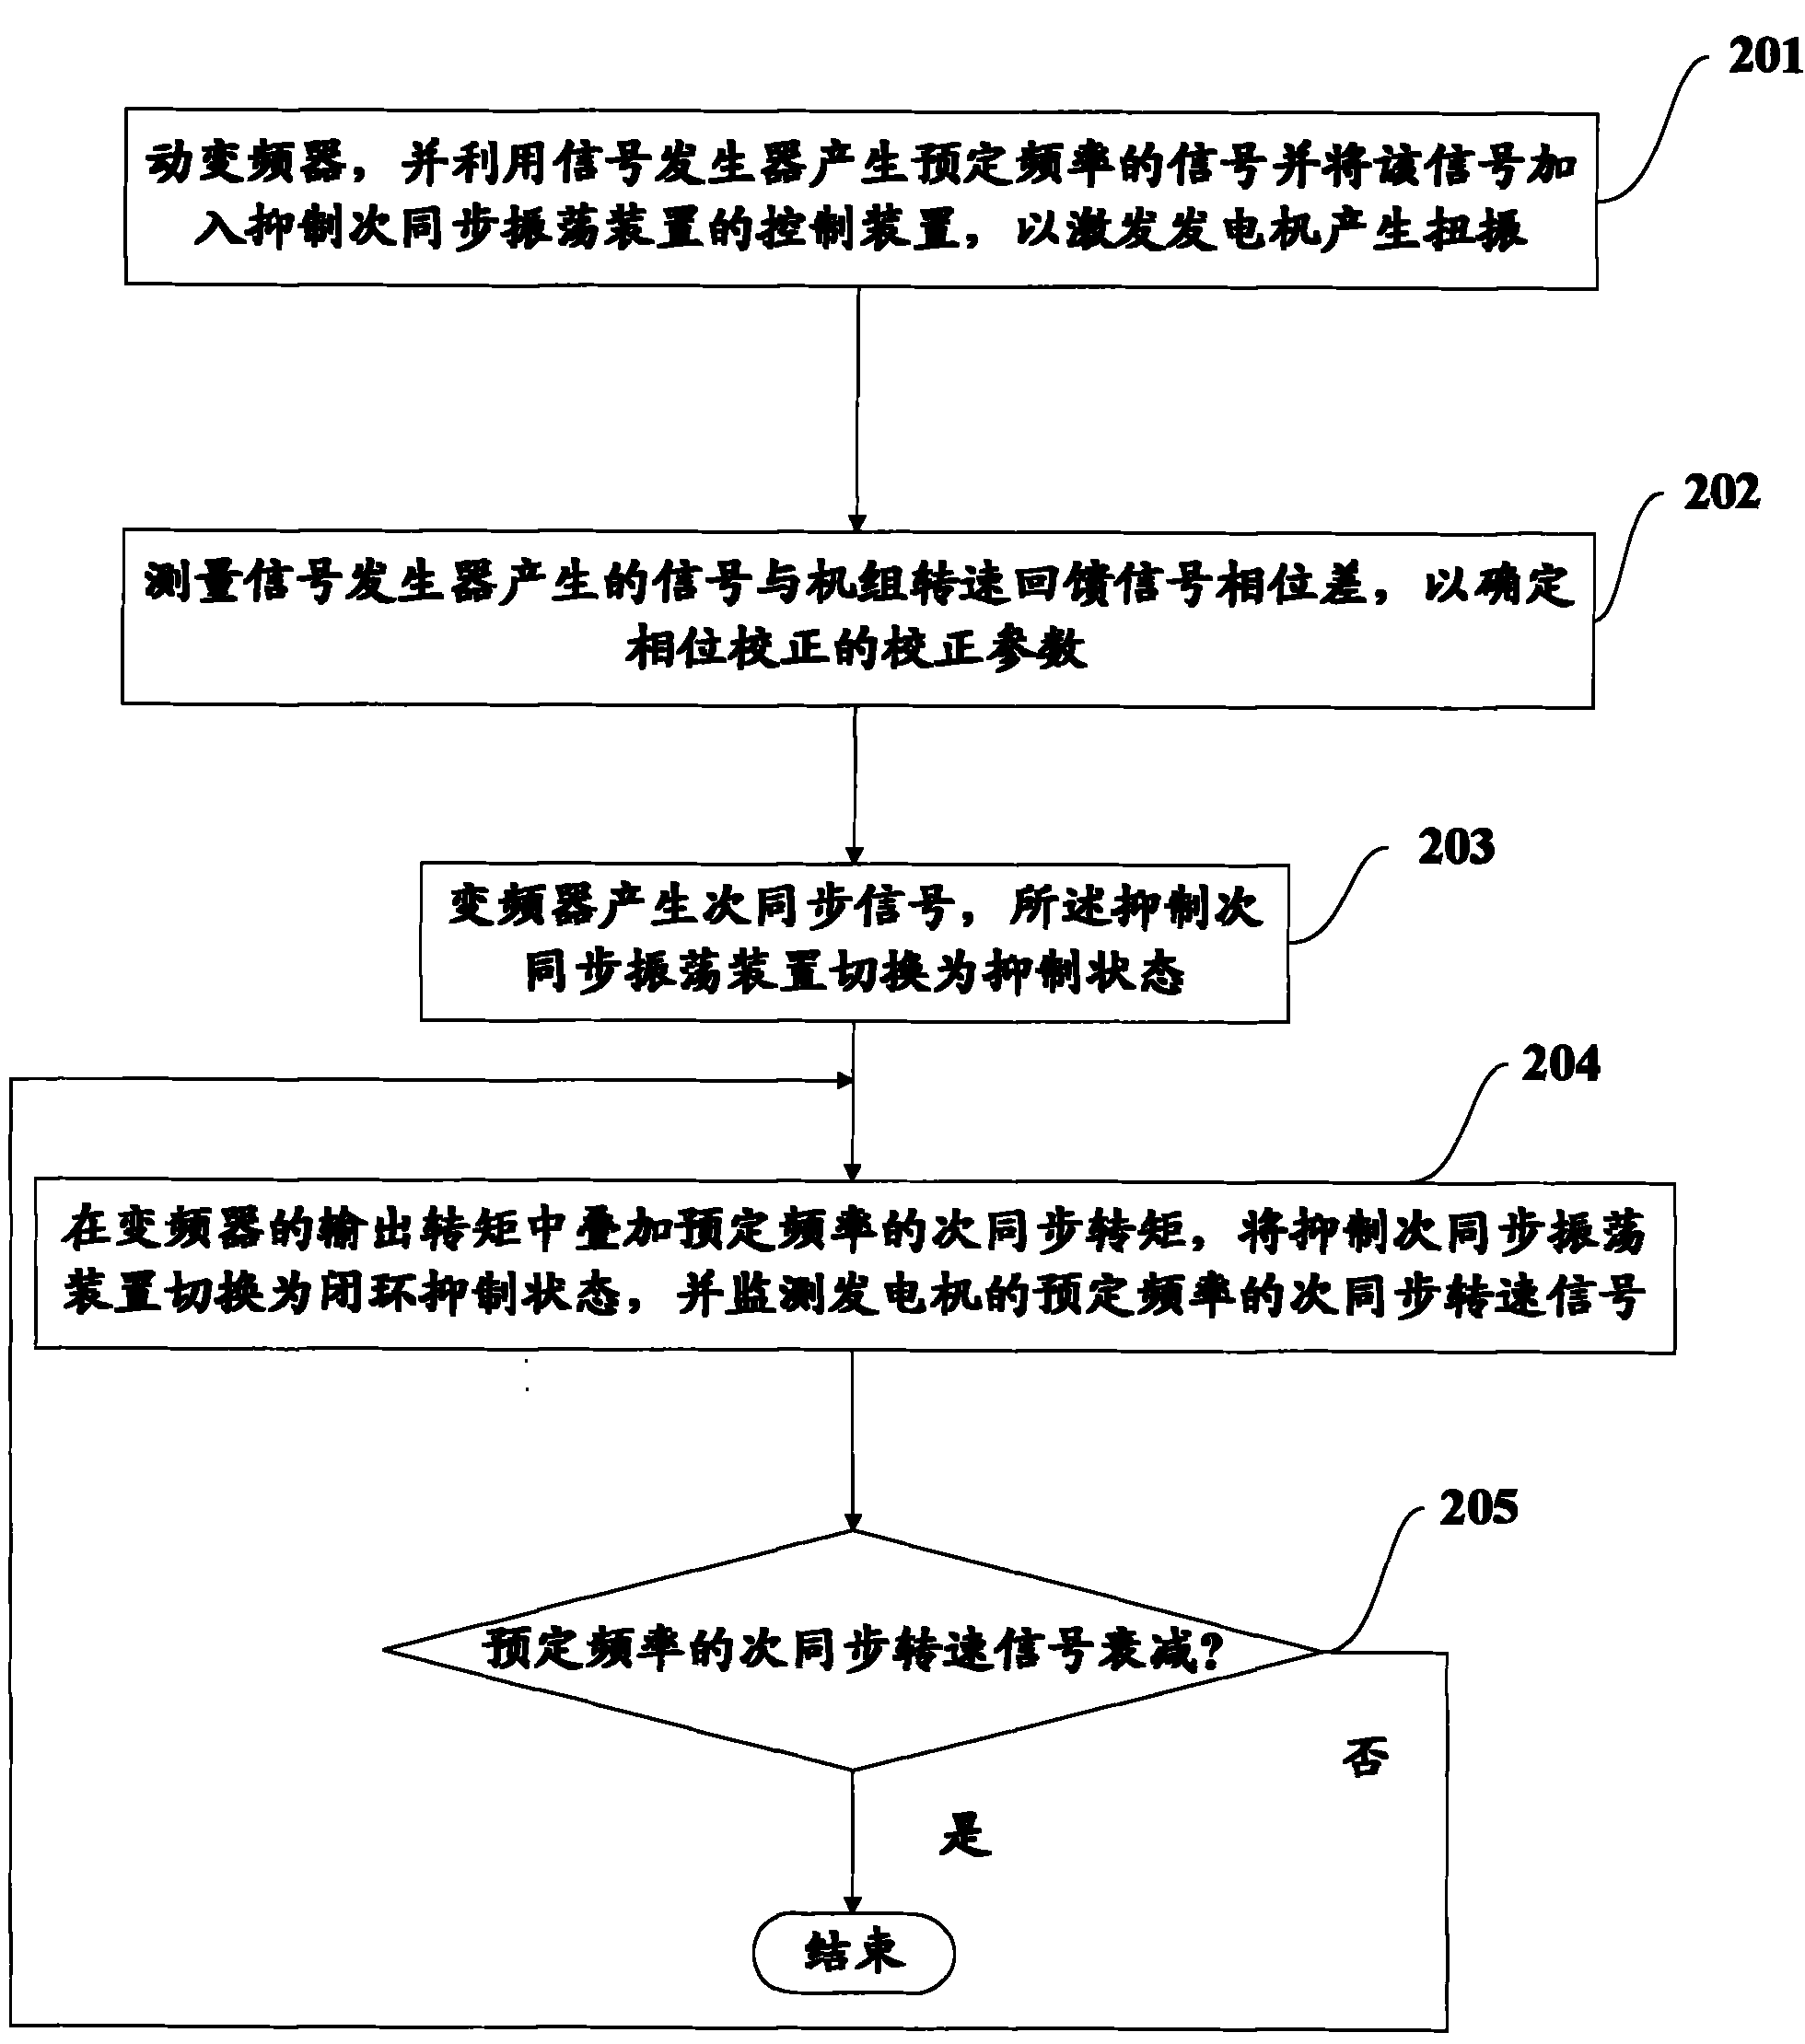 Moving die test method by use of restraint subsynchronous resonance (SSR) device